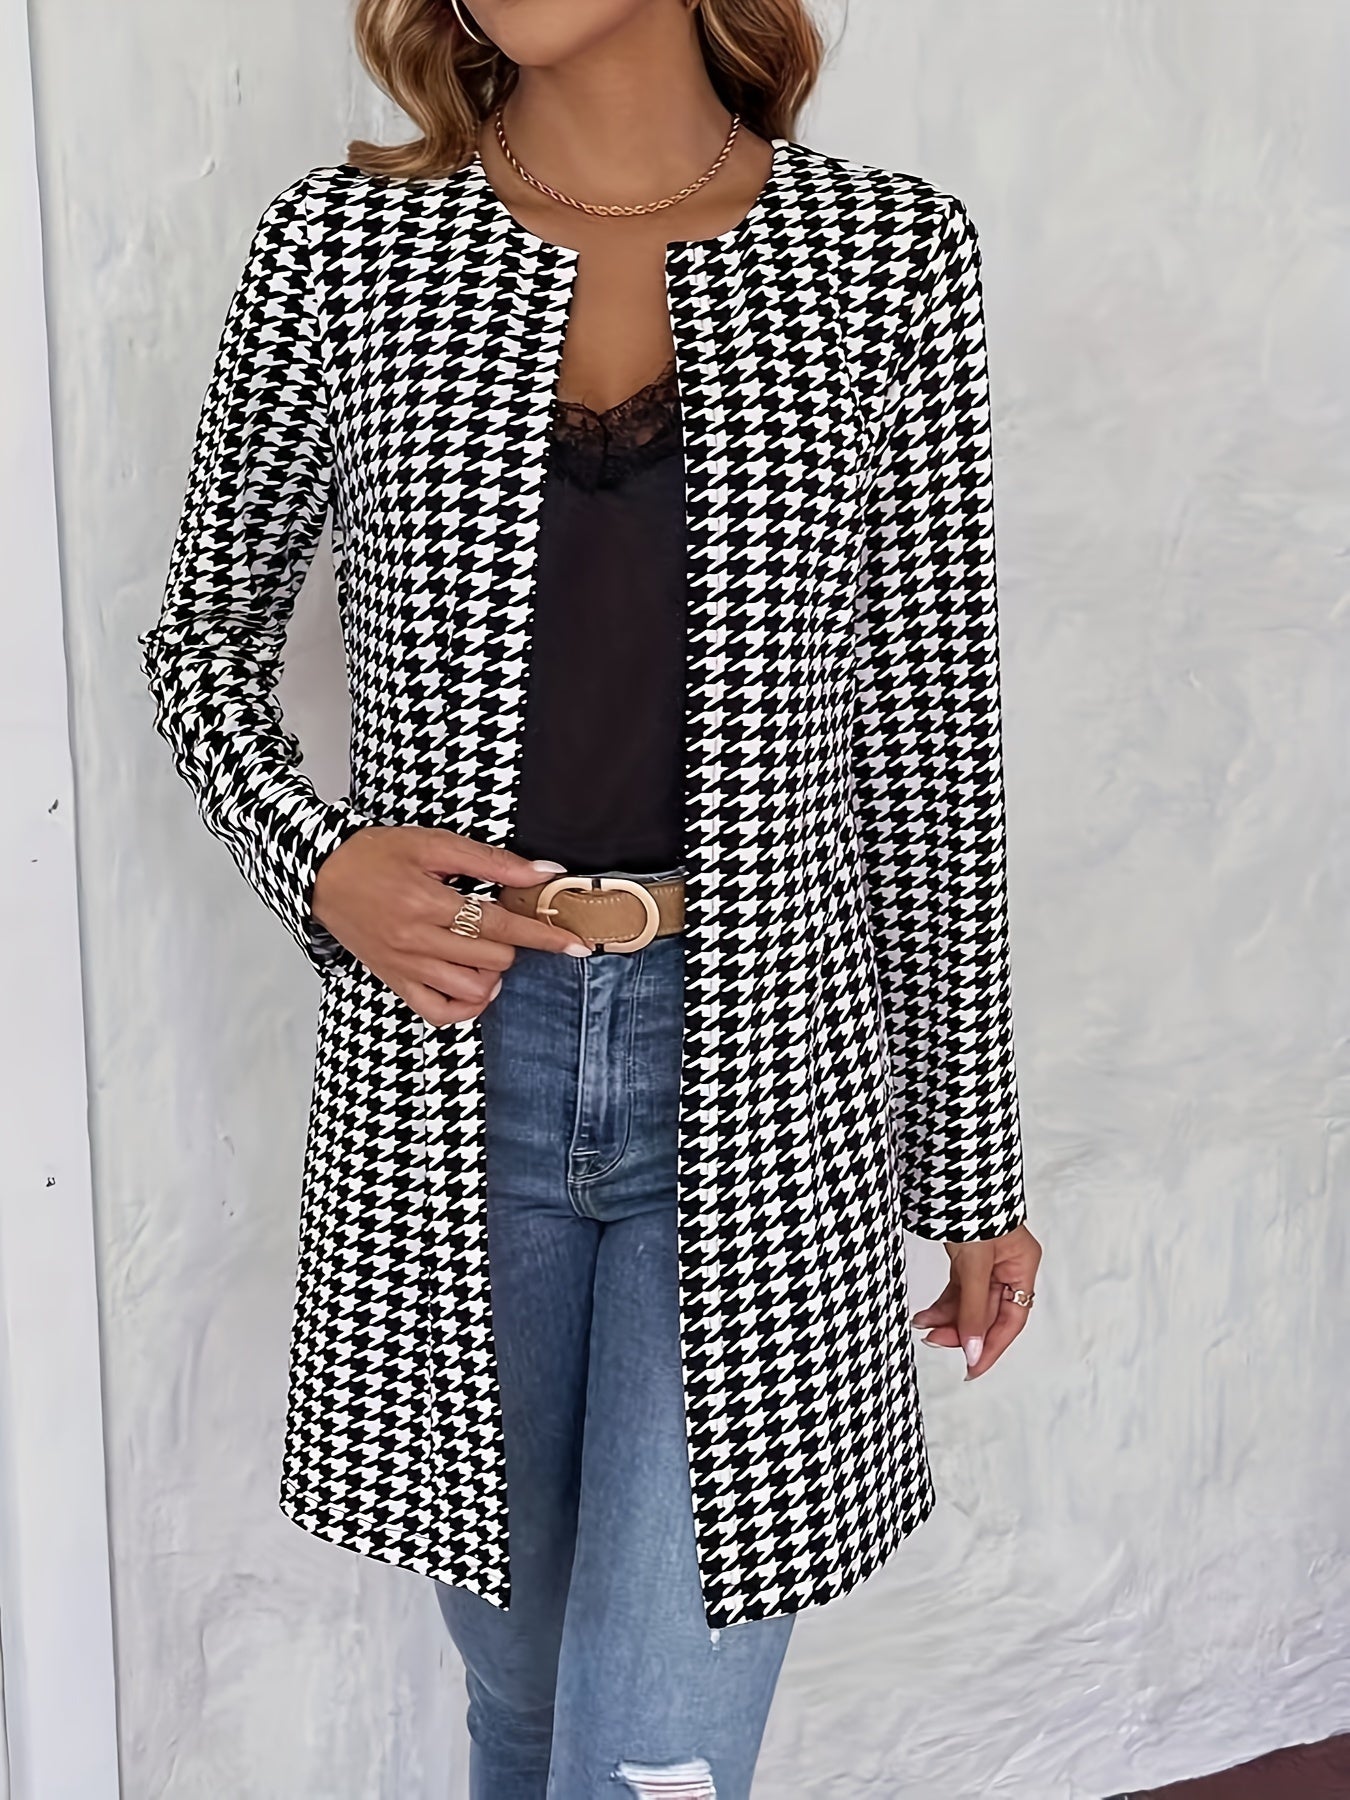 Houndstooth Print Long Sleeve Jacket, Casual Open Front Crew Neck Outerwear, Women's Clothing